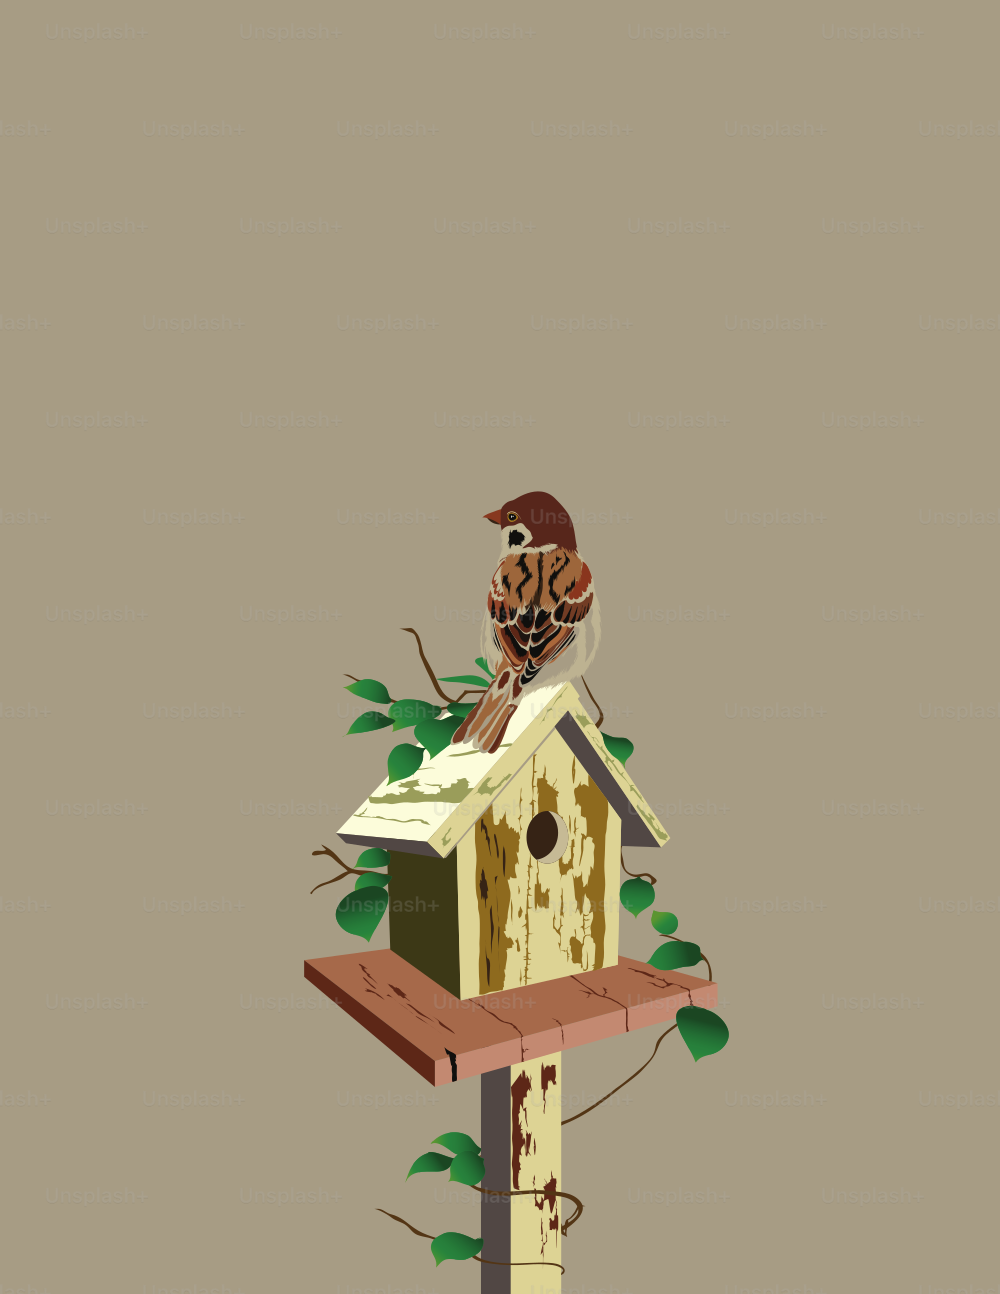 Sparrow is on the top of the bird house.